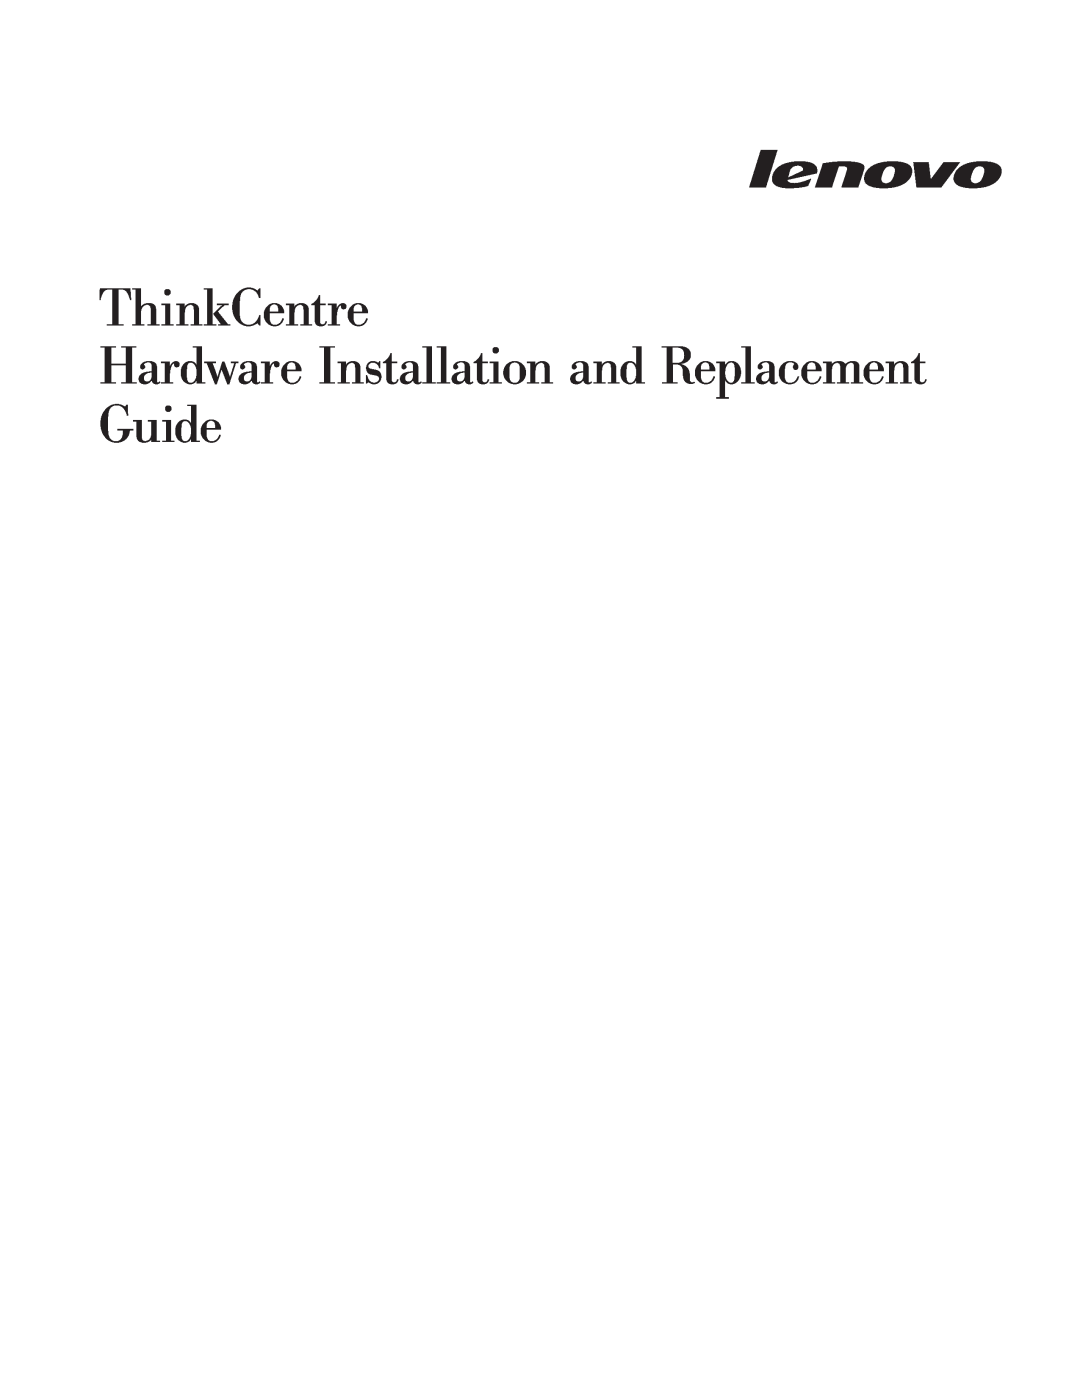 Lenovo 7627, 9964, 6137, 8910, 7630, 7360, 7483, 7357, 7354, 7220, 7174 ThinkCentre Hardware Installation and Replacement, Guide 